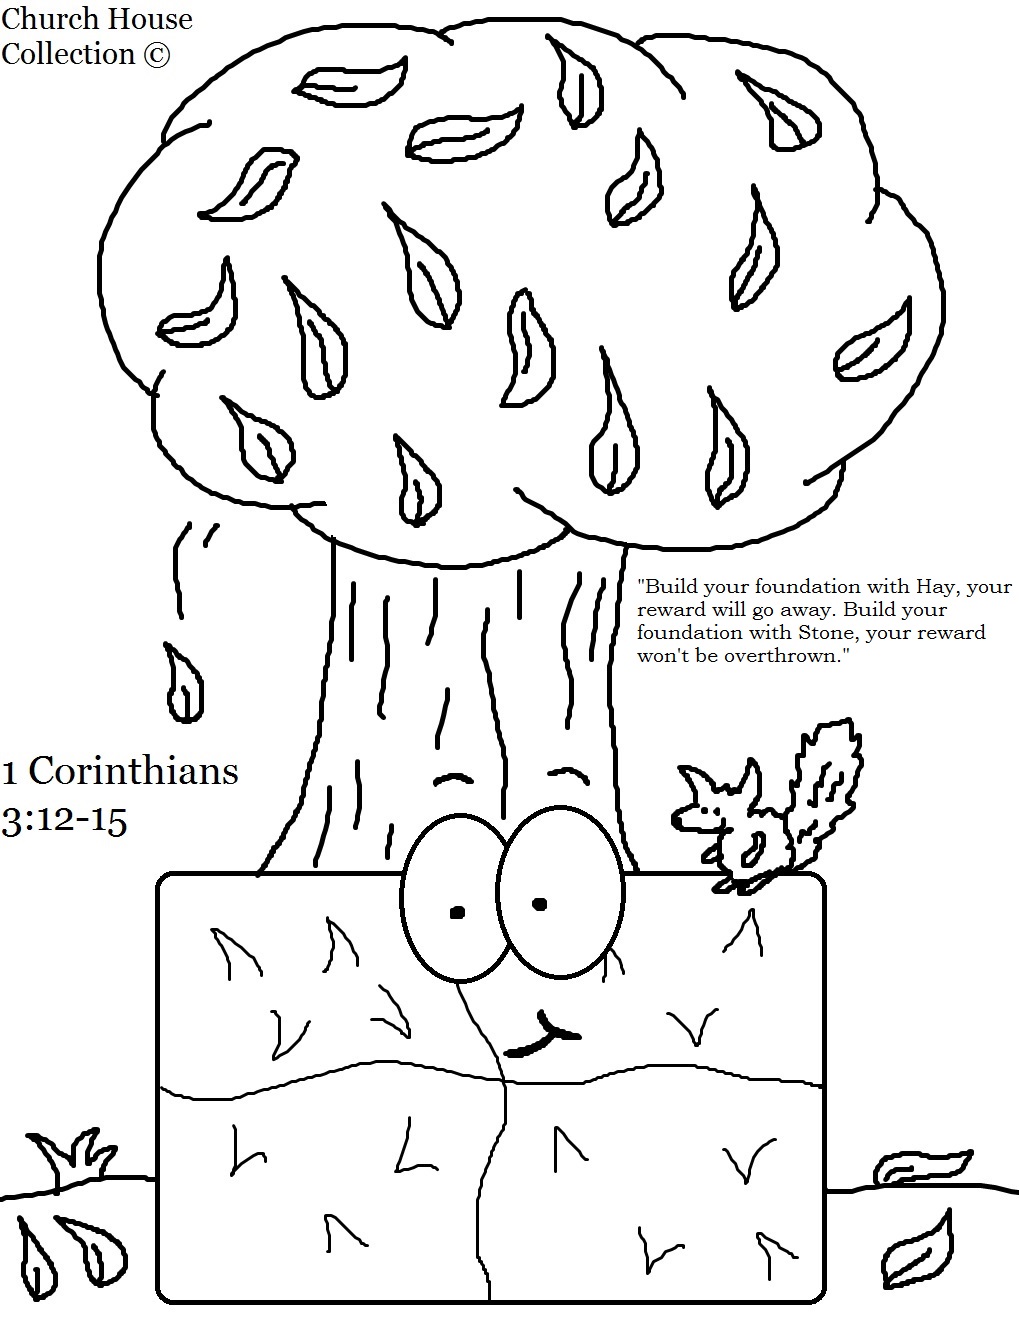 Hay Coloring Page With Scripture Hay Coloring Page Without Scripture    